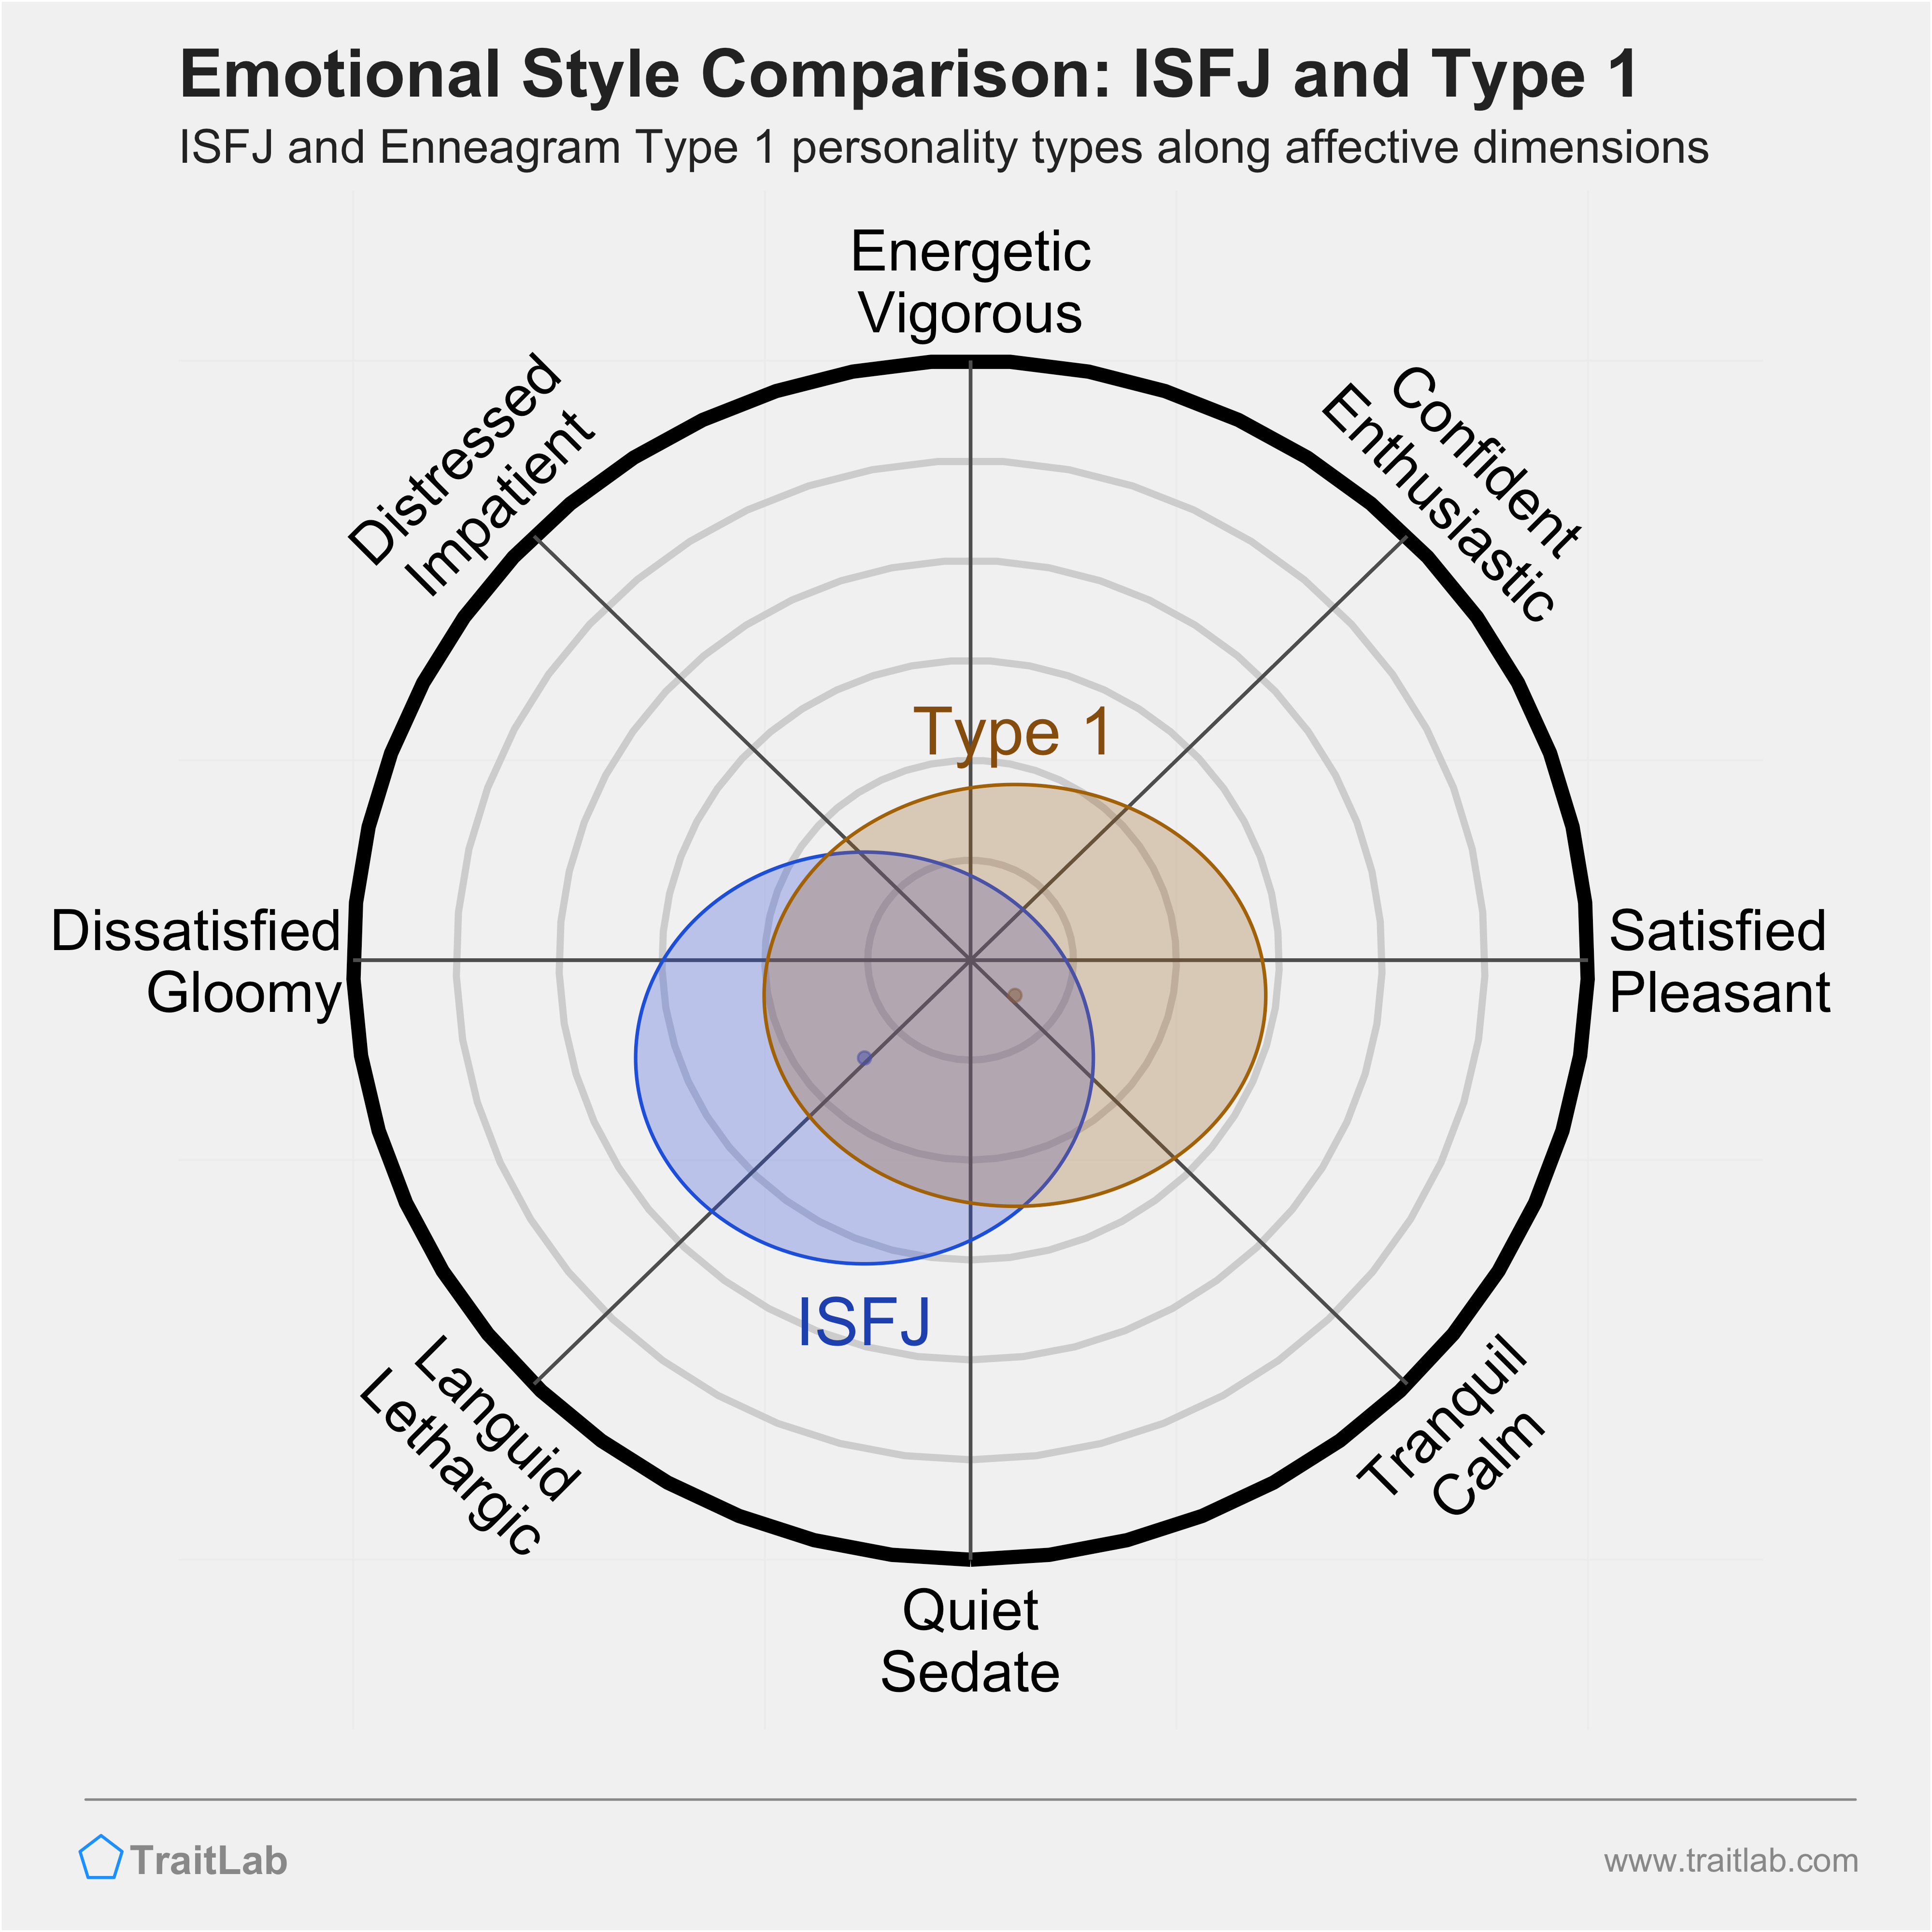 ISFJ and Type 1 comparison across emotional (affective) dimensions